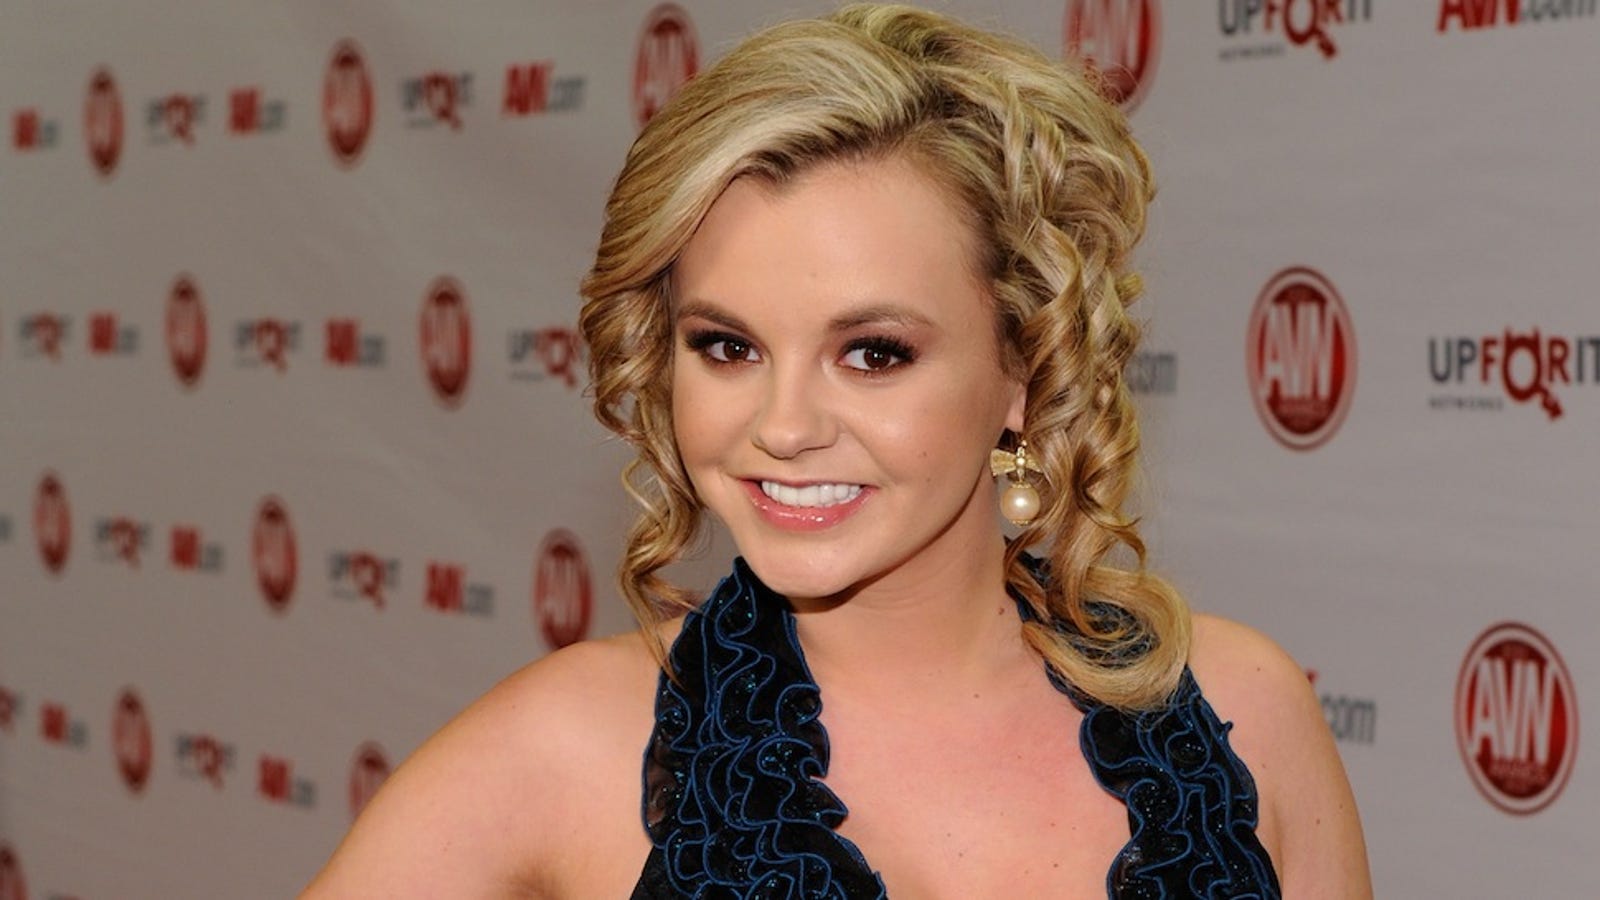 Charlie Sheens Ex Bree Olson Says Shes Not Hiv Positive